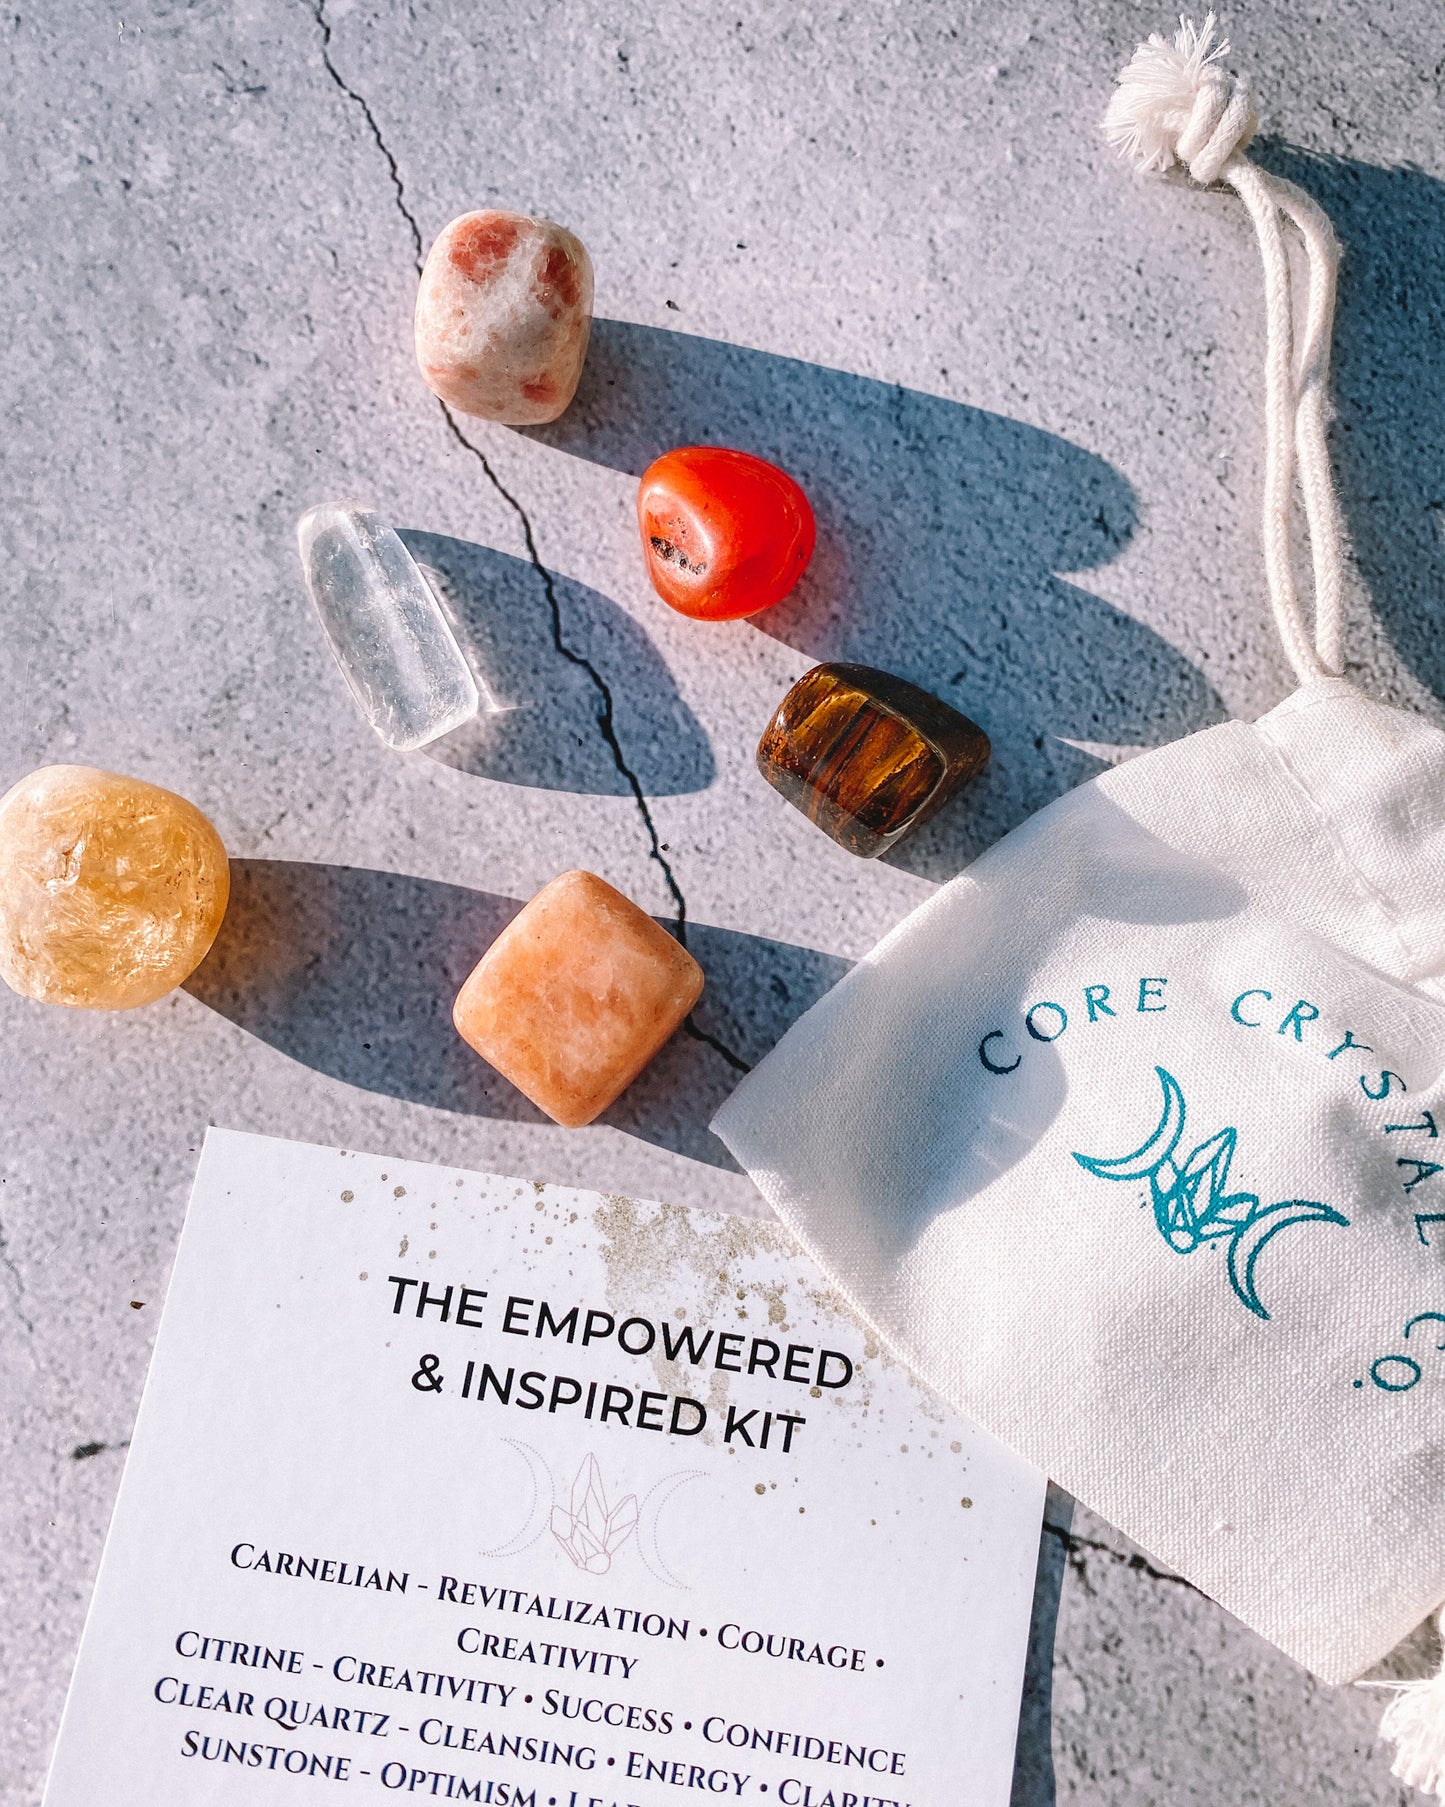 The empowered & inspired kit